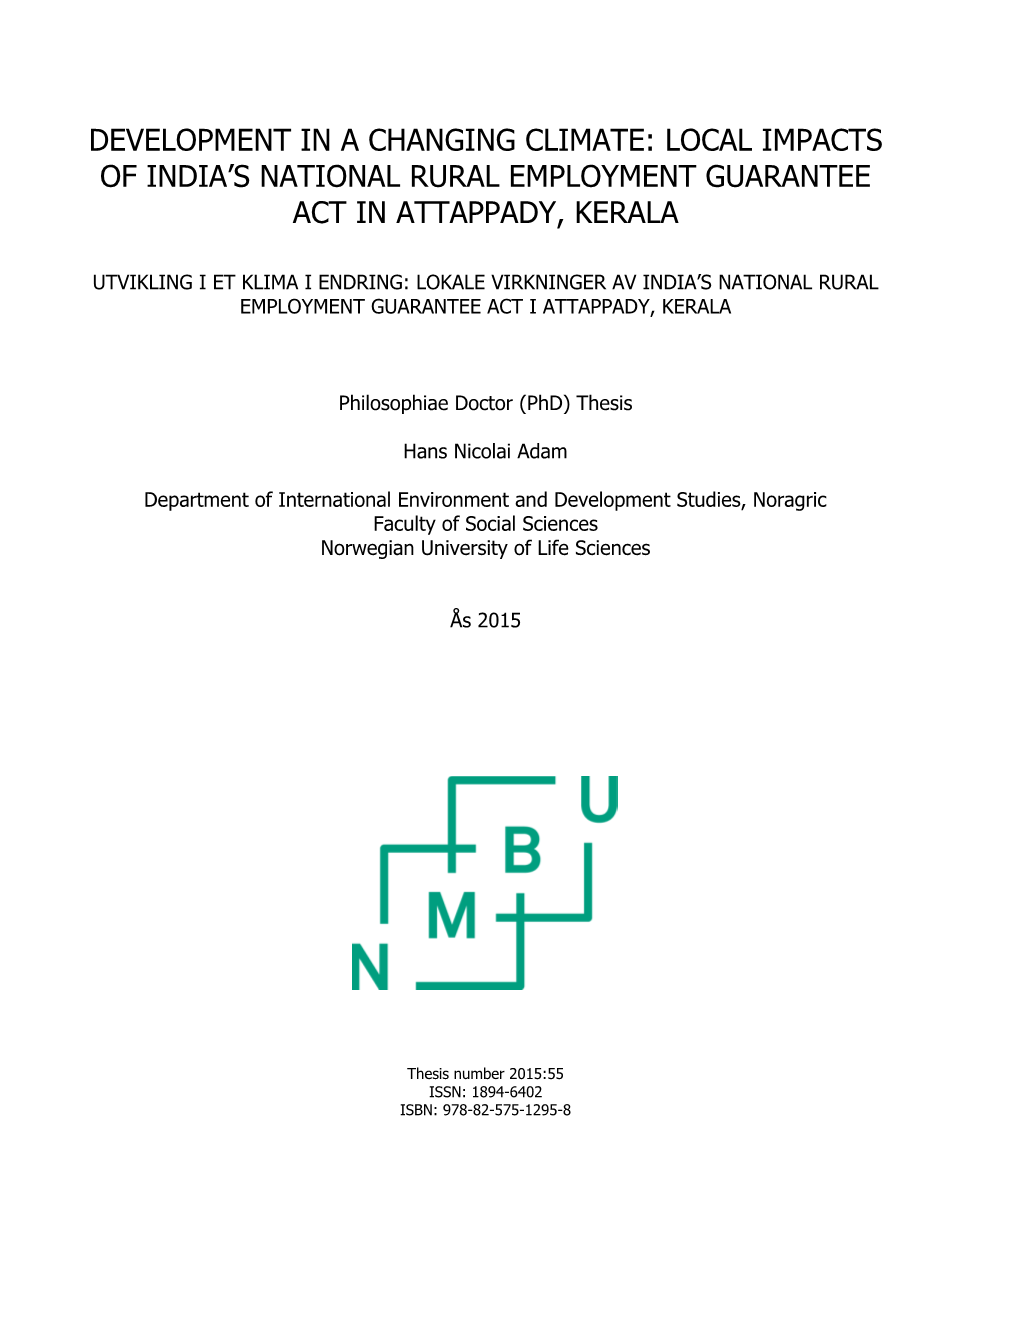 Development in a Changing Climate: Local Impacts of India's National Rural Employment Guarantee Act in Attappady, Kerala